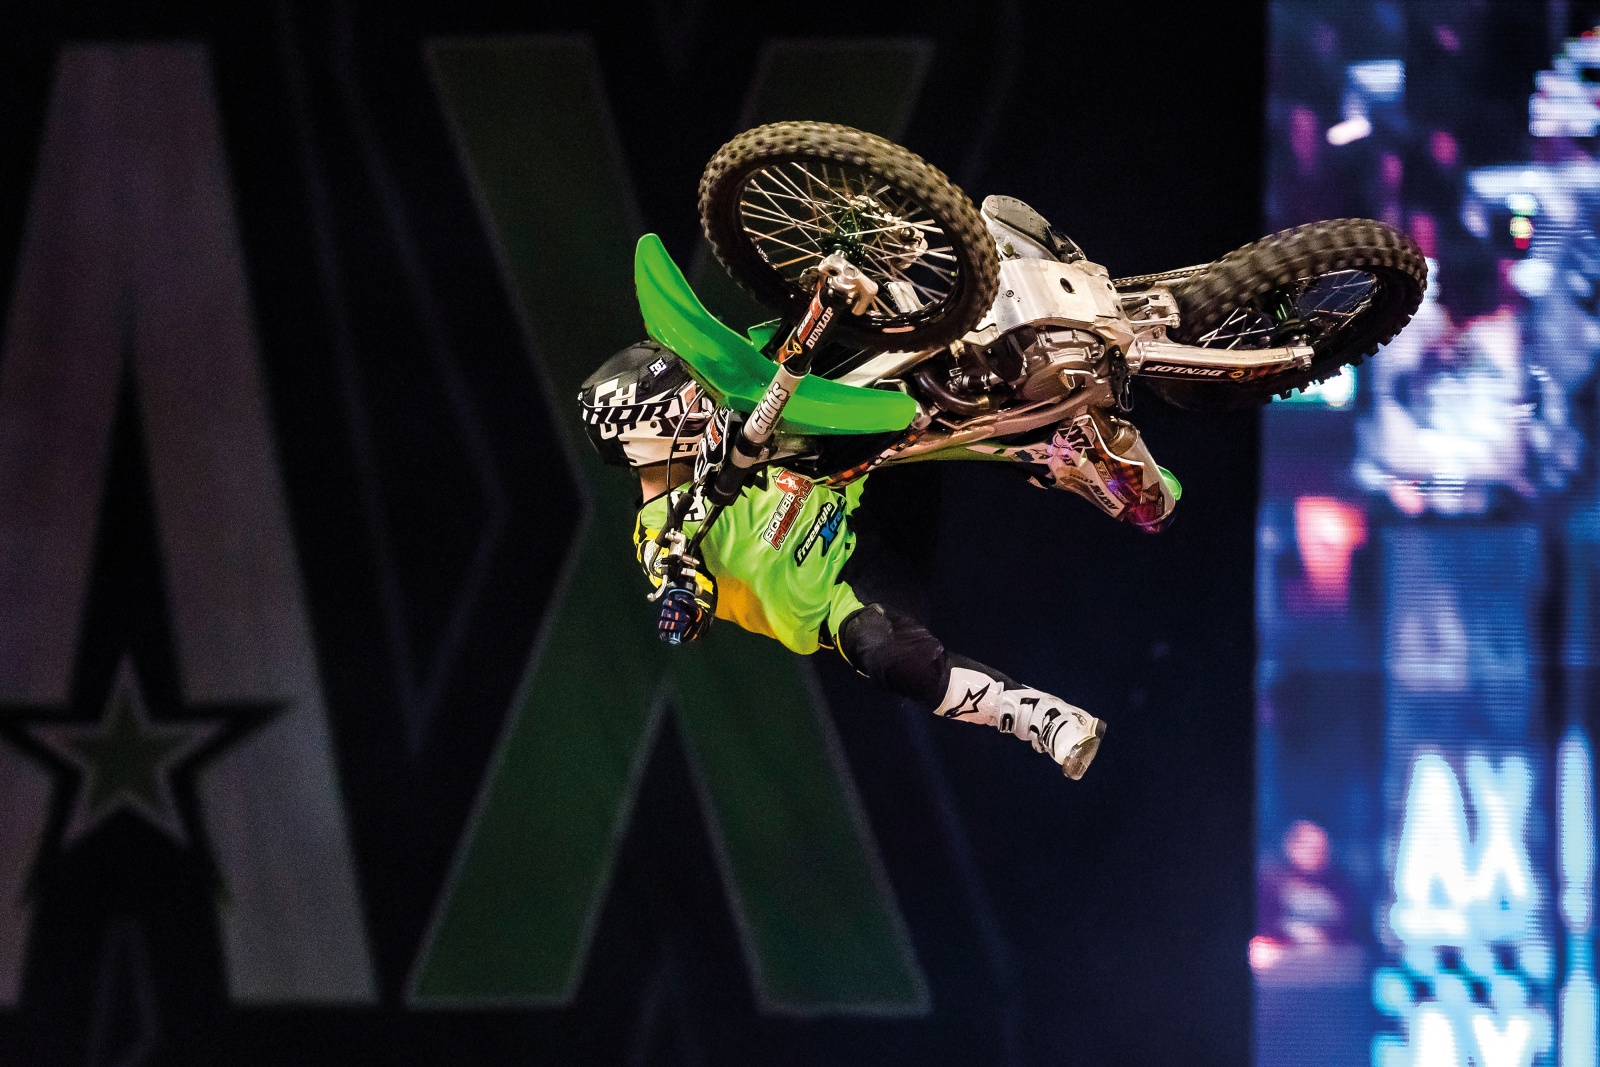 FREESTYLE MOTOCROSS LANDS AT ARENACROSS